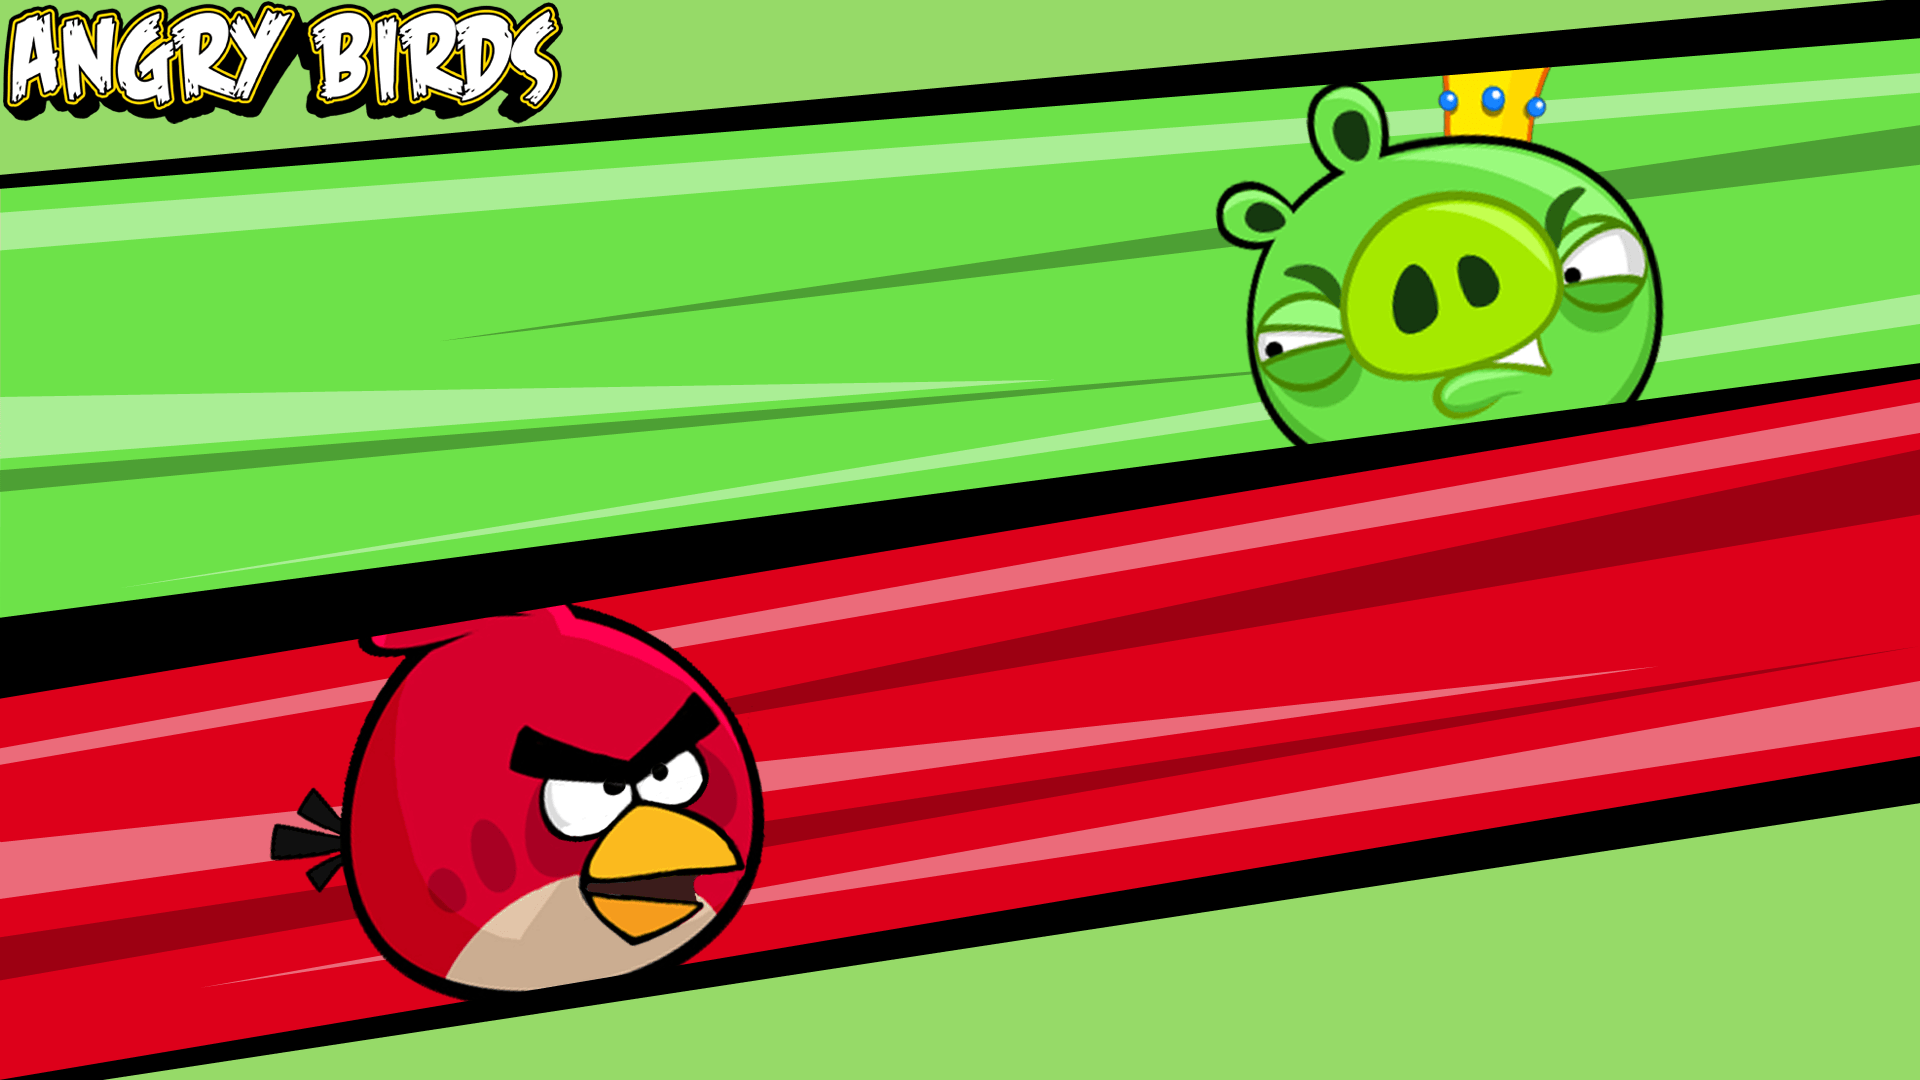 Angry Birds wallpaper Red